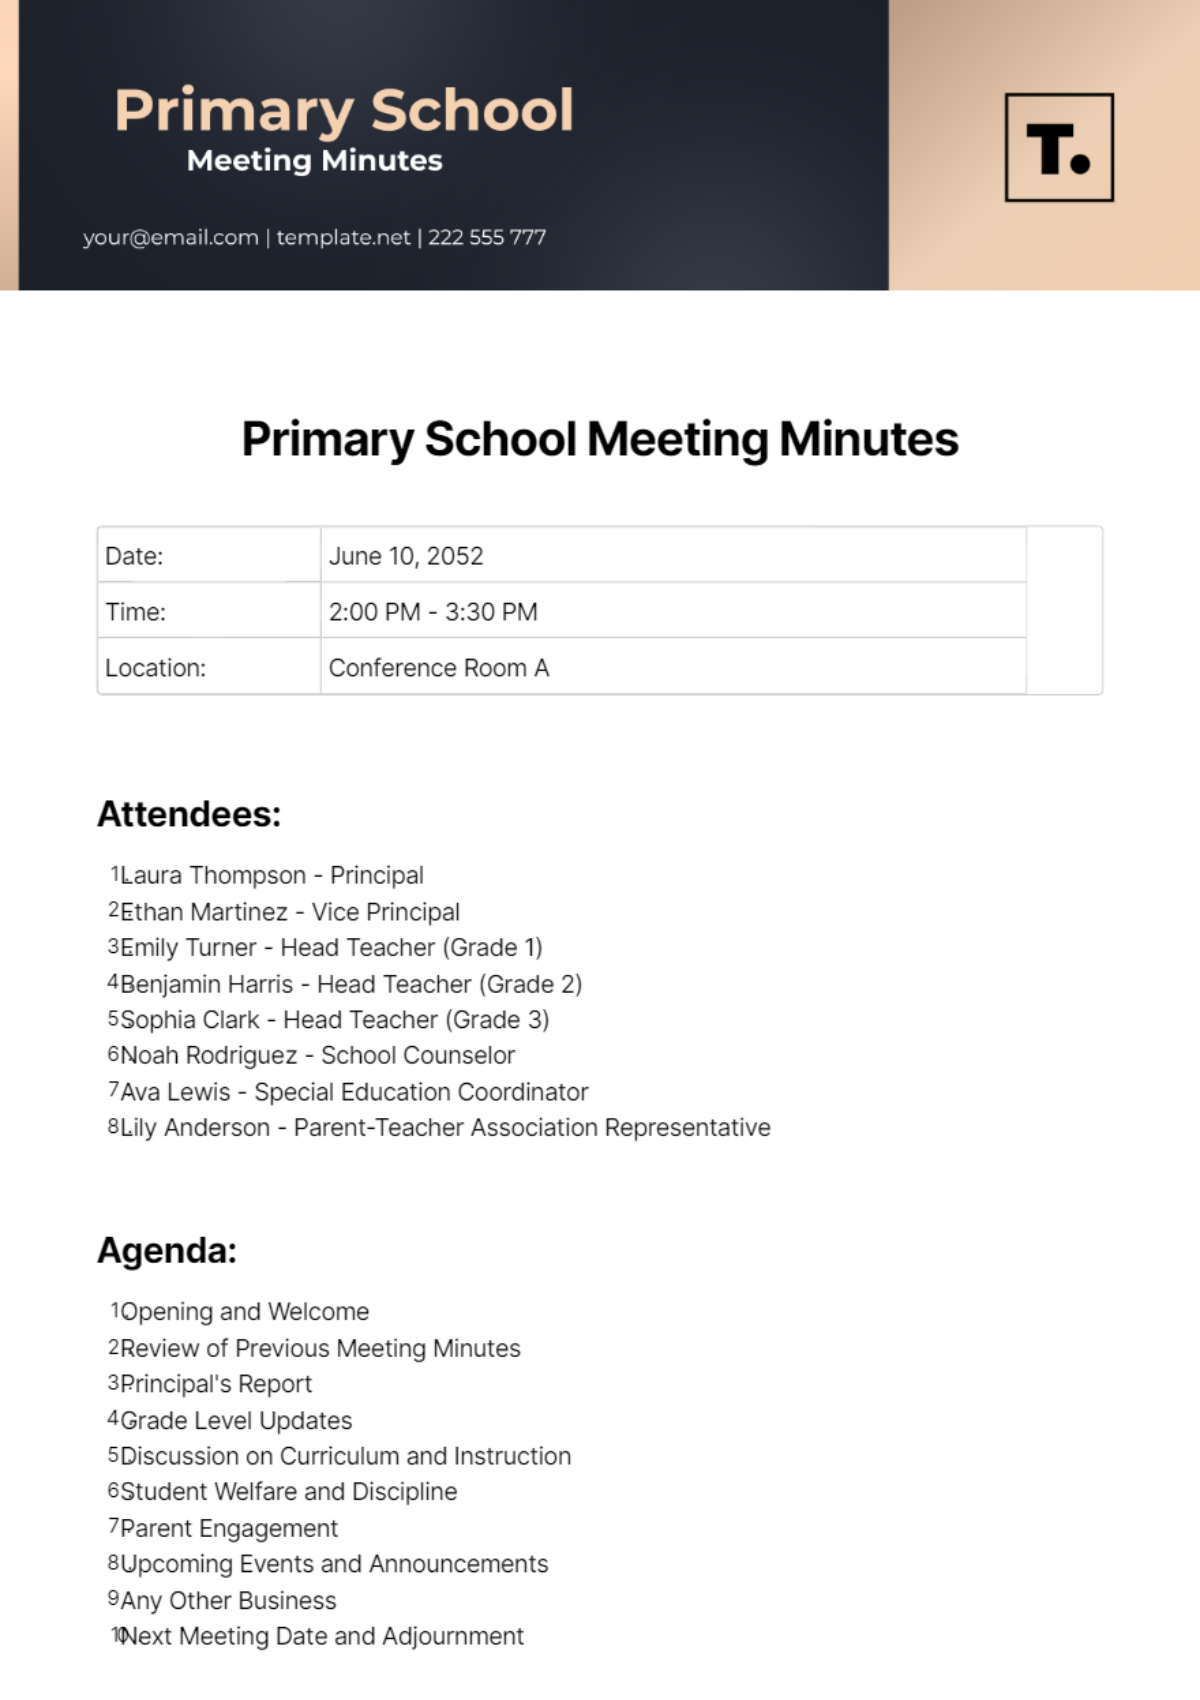 Primary School Meeting Minutes Template